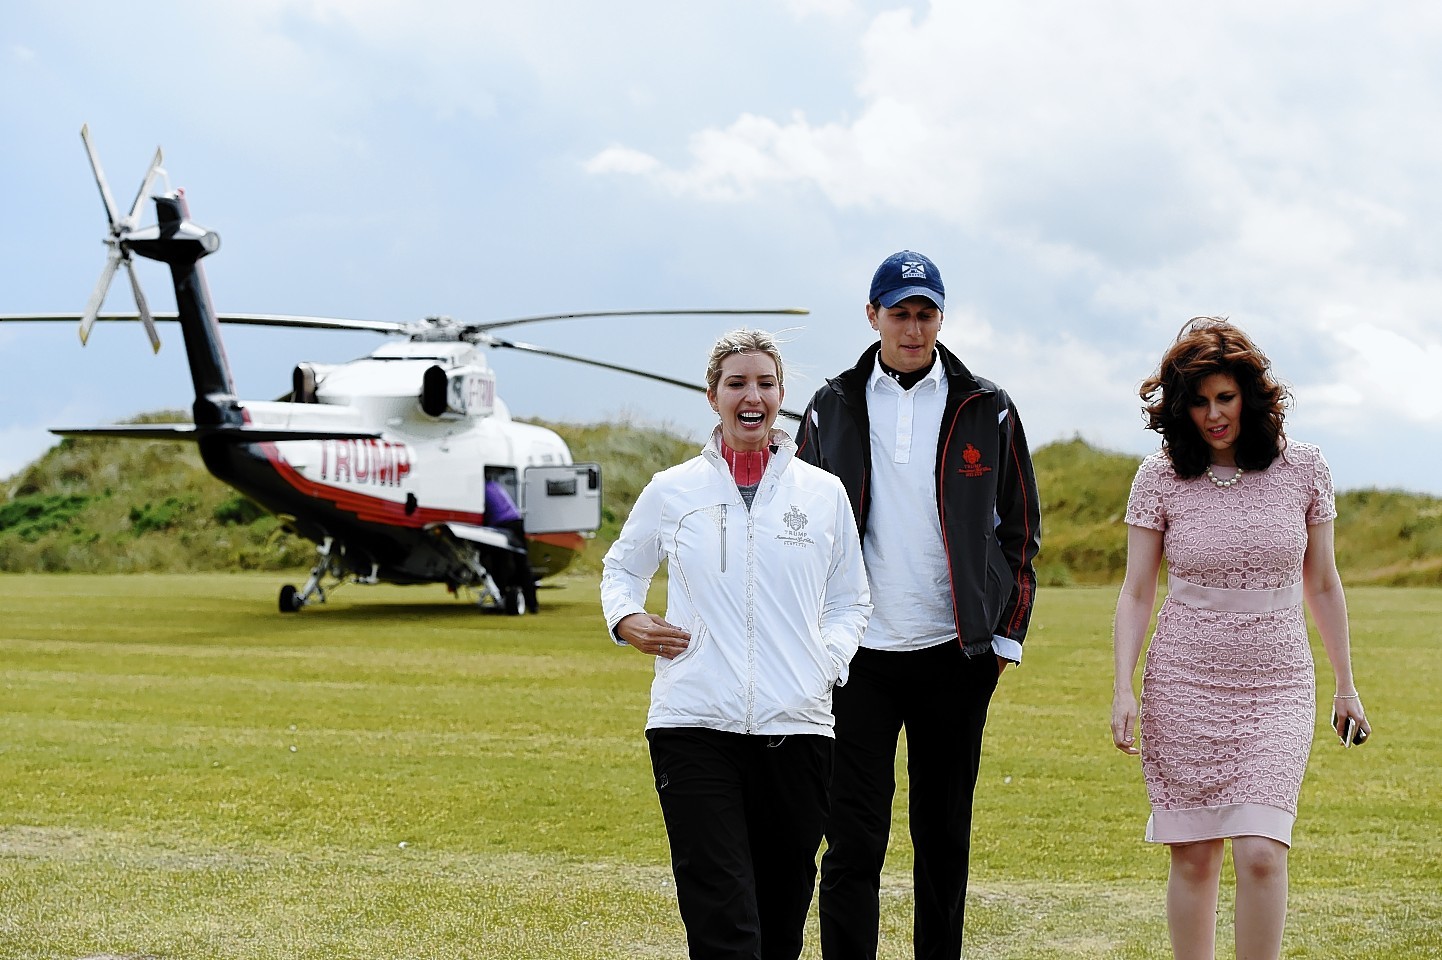 Ivanka Trump and her husband Jared Kushner flew into Trump International Golf Links Scotland by helicopter